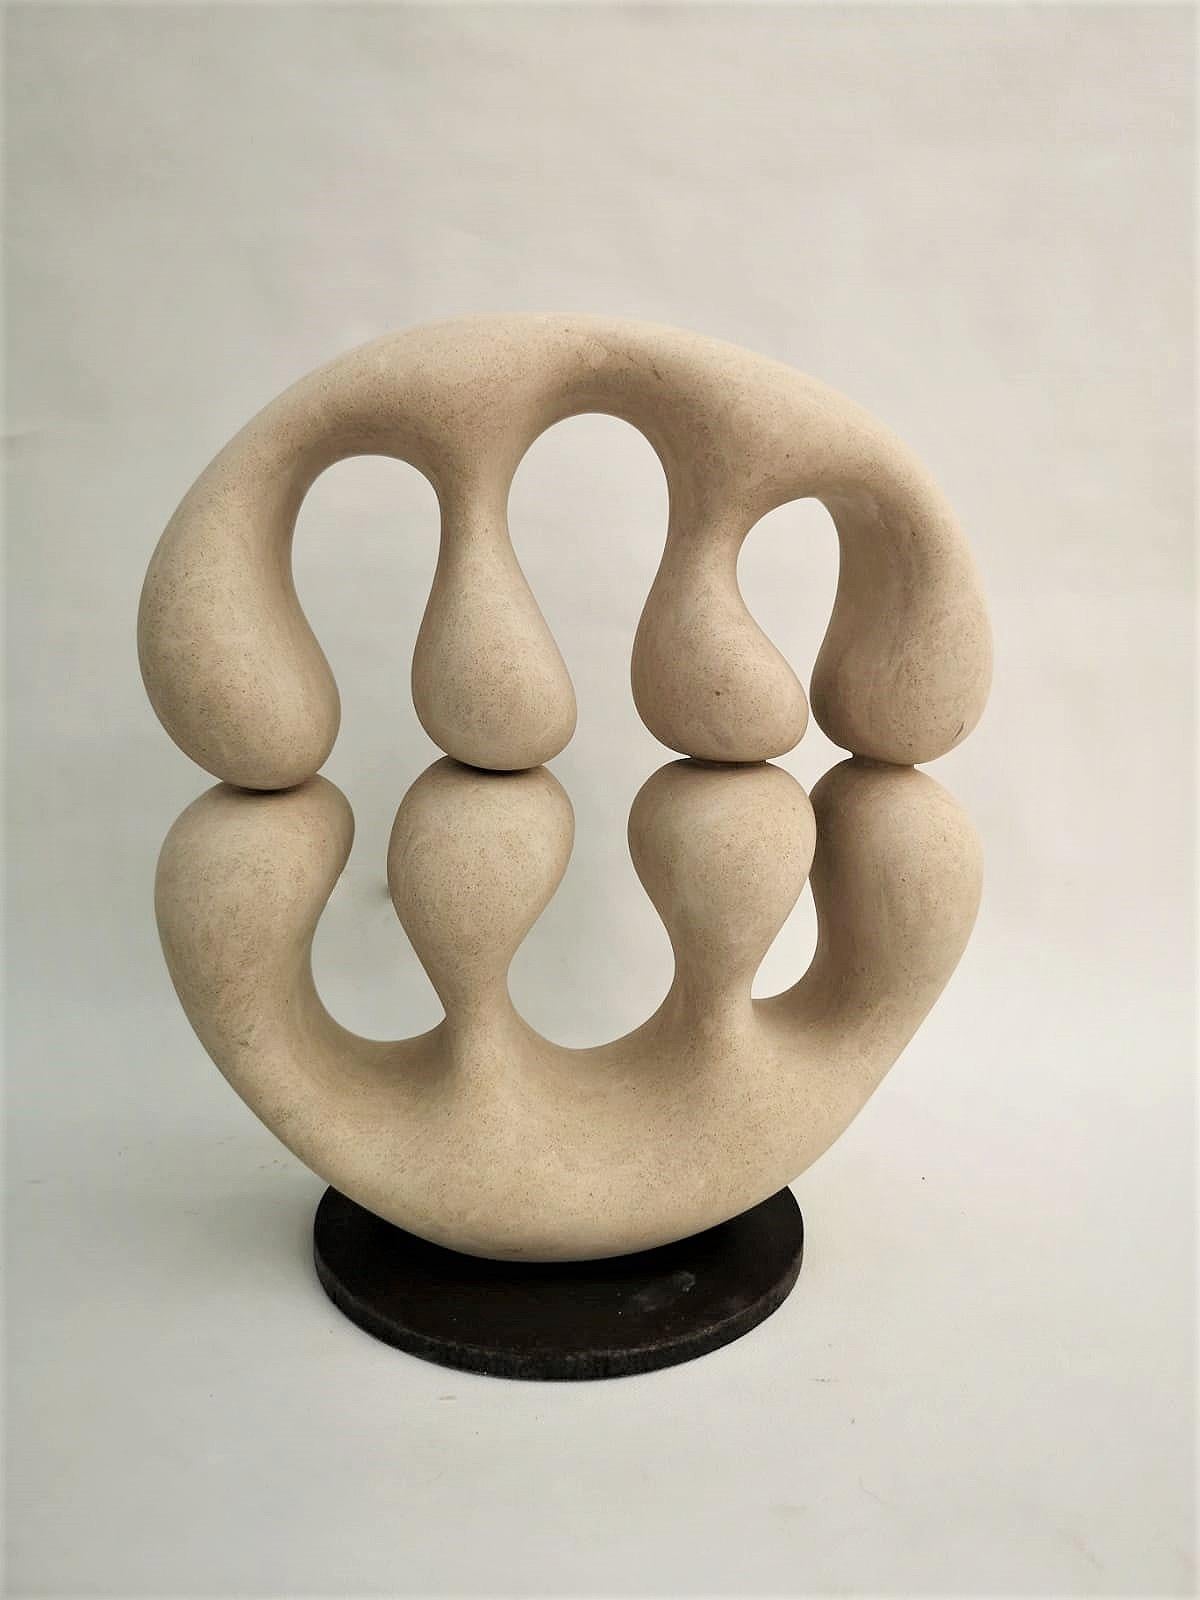 21st century abstract sculpture hands by Renzo Buttazzo from Italy.

Sculpture in Lecce Stone.
Delivered with a certificate of authenticity.

Since 1886 Renzo Buttazzo work with Pietra Leccese (limestone from Lecce), and during this time he combined